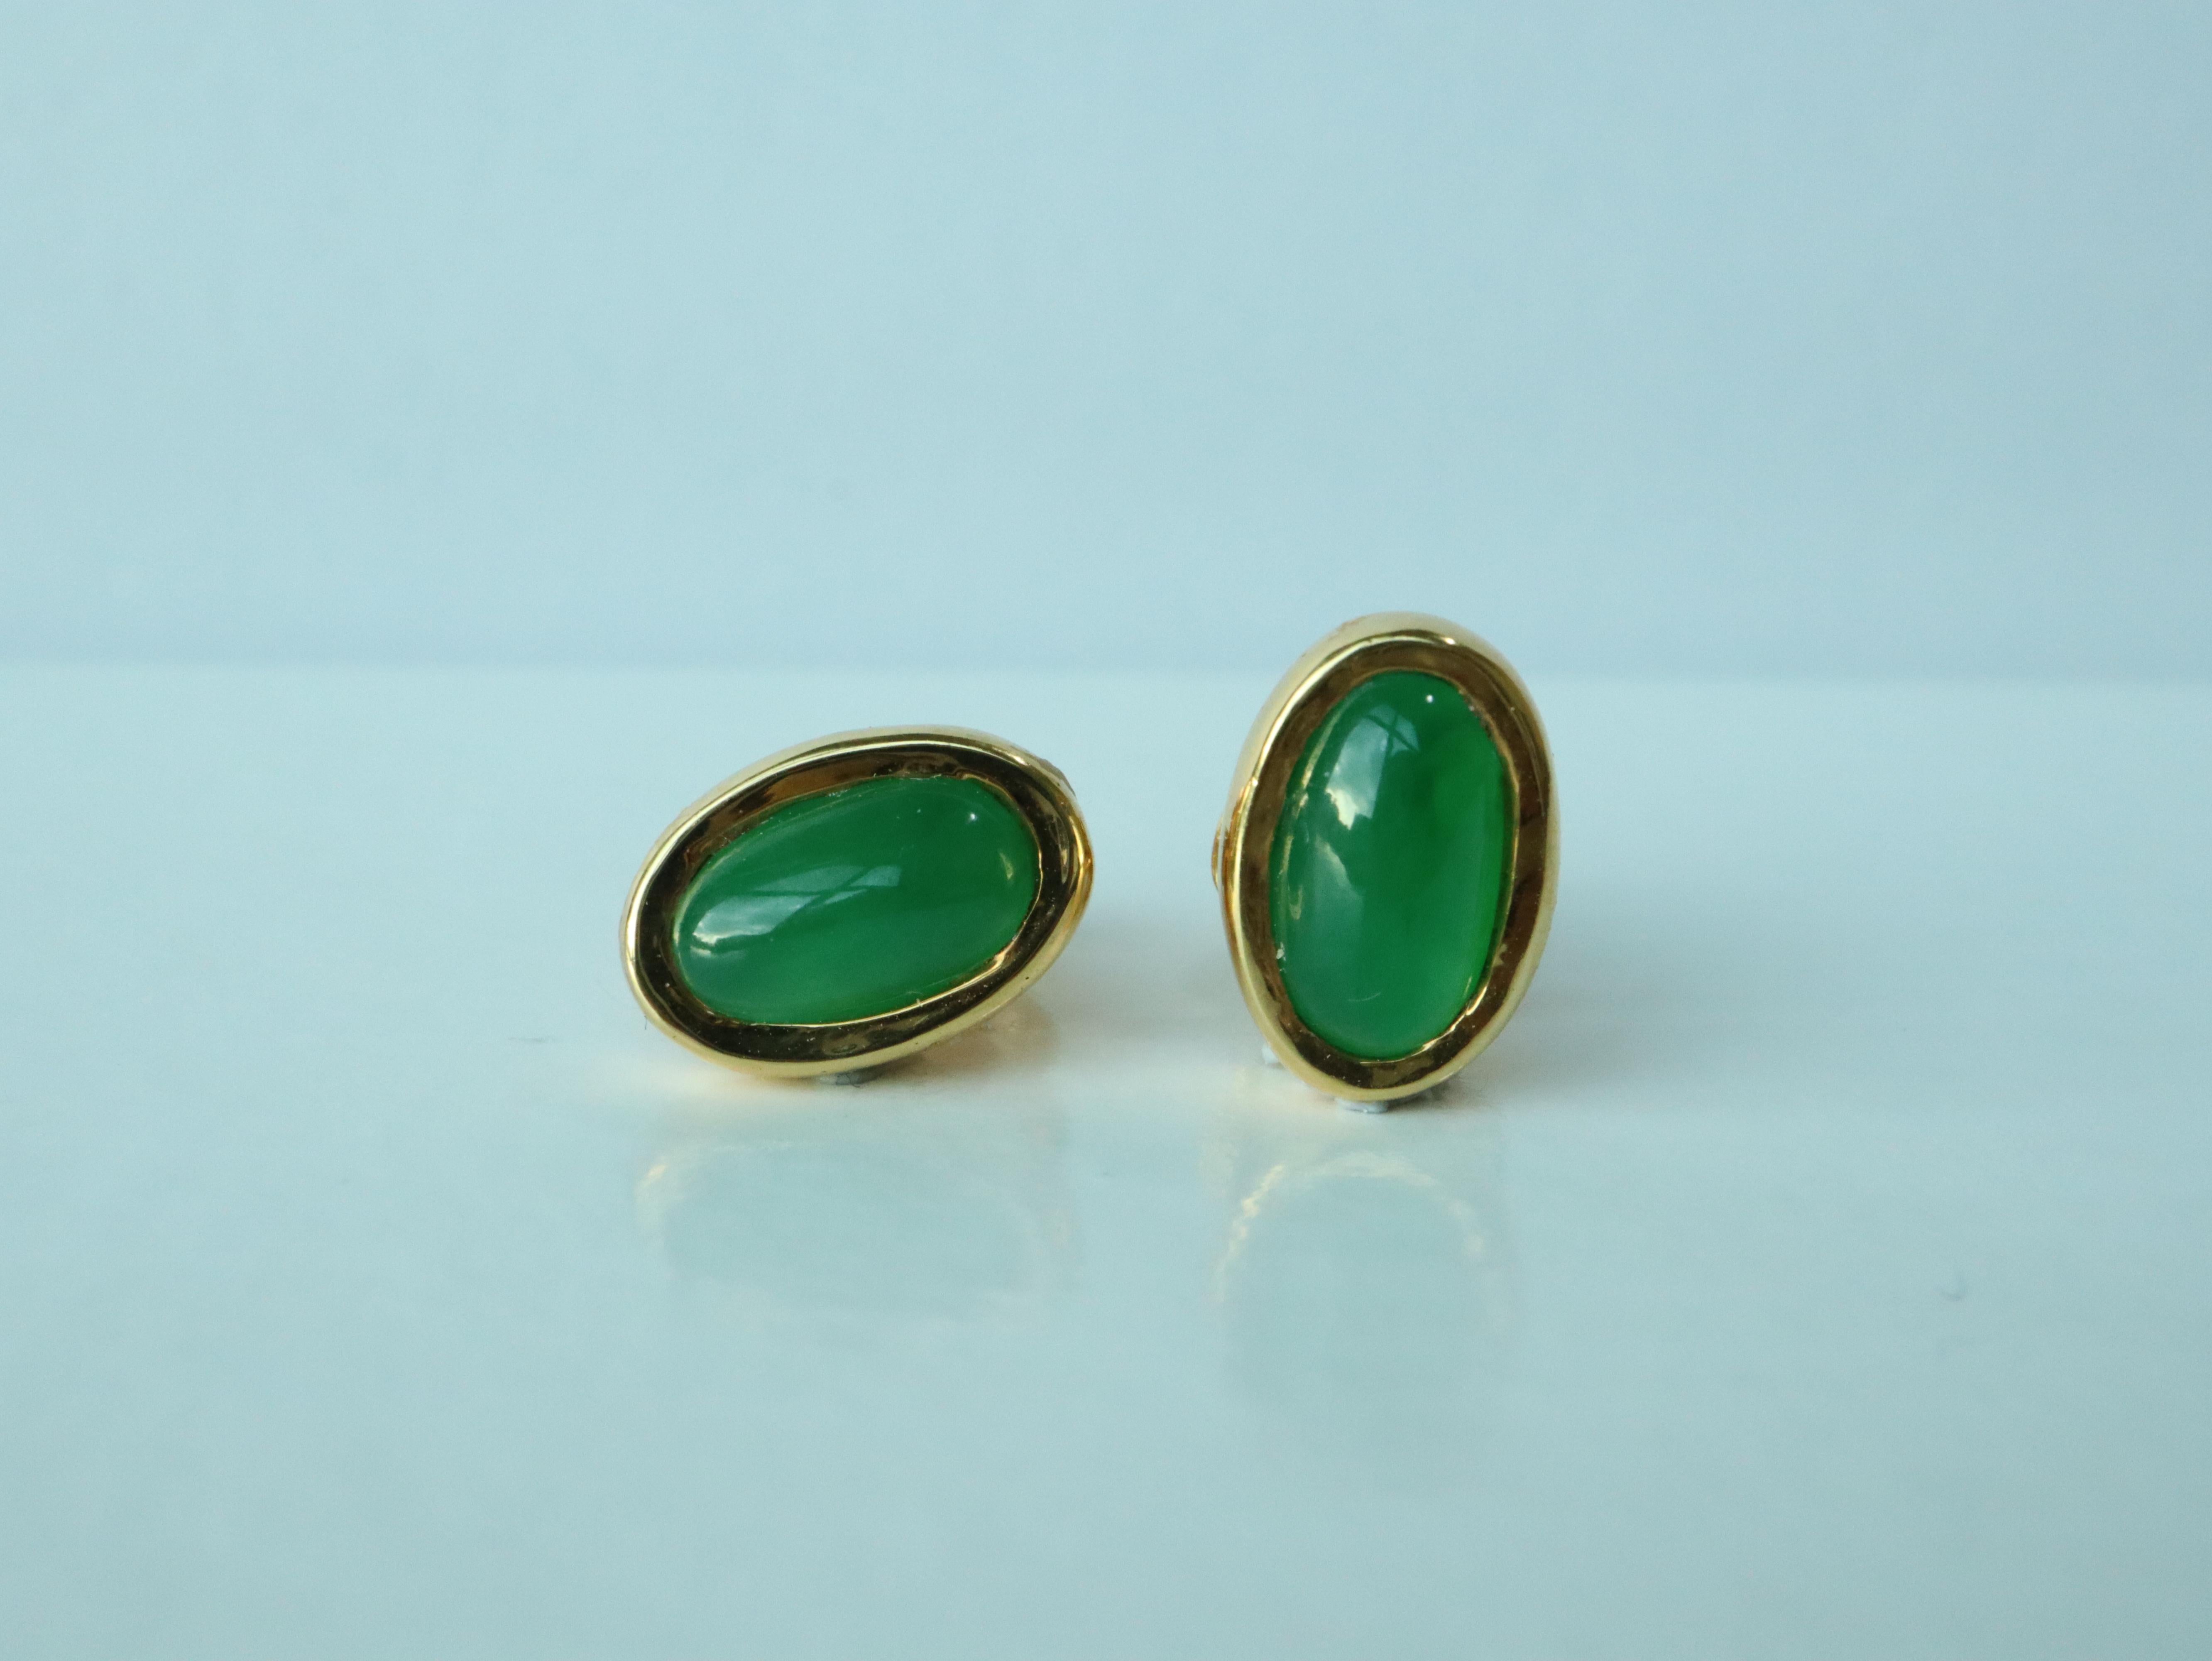 This earring is set with Burmese Type A Jadeite Jade in 18k solid gold. Both the jade and the gold are completely natural, originating from Burma, and free from any enhancements or treatments. We fully guarantee their authenticity. These earrings